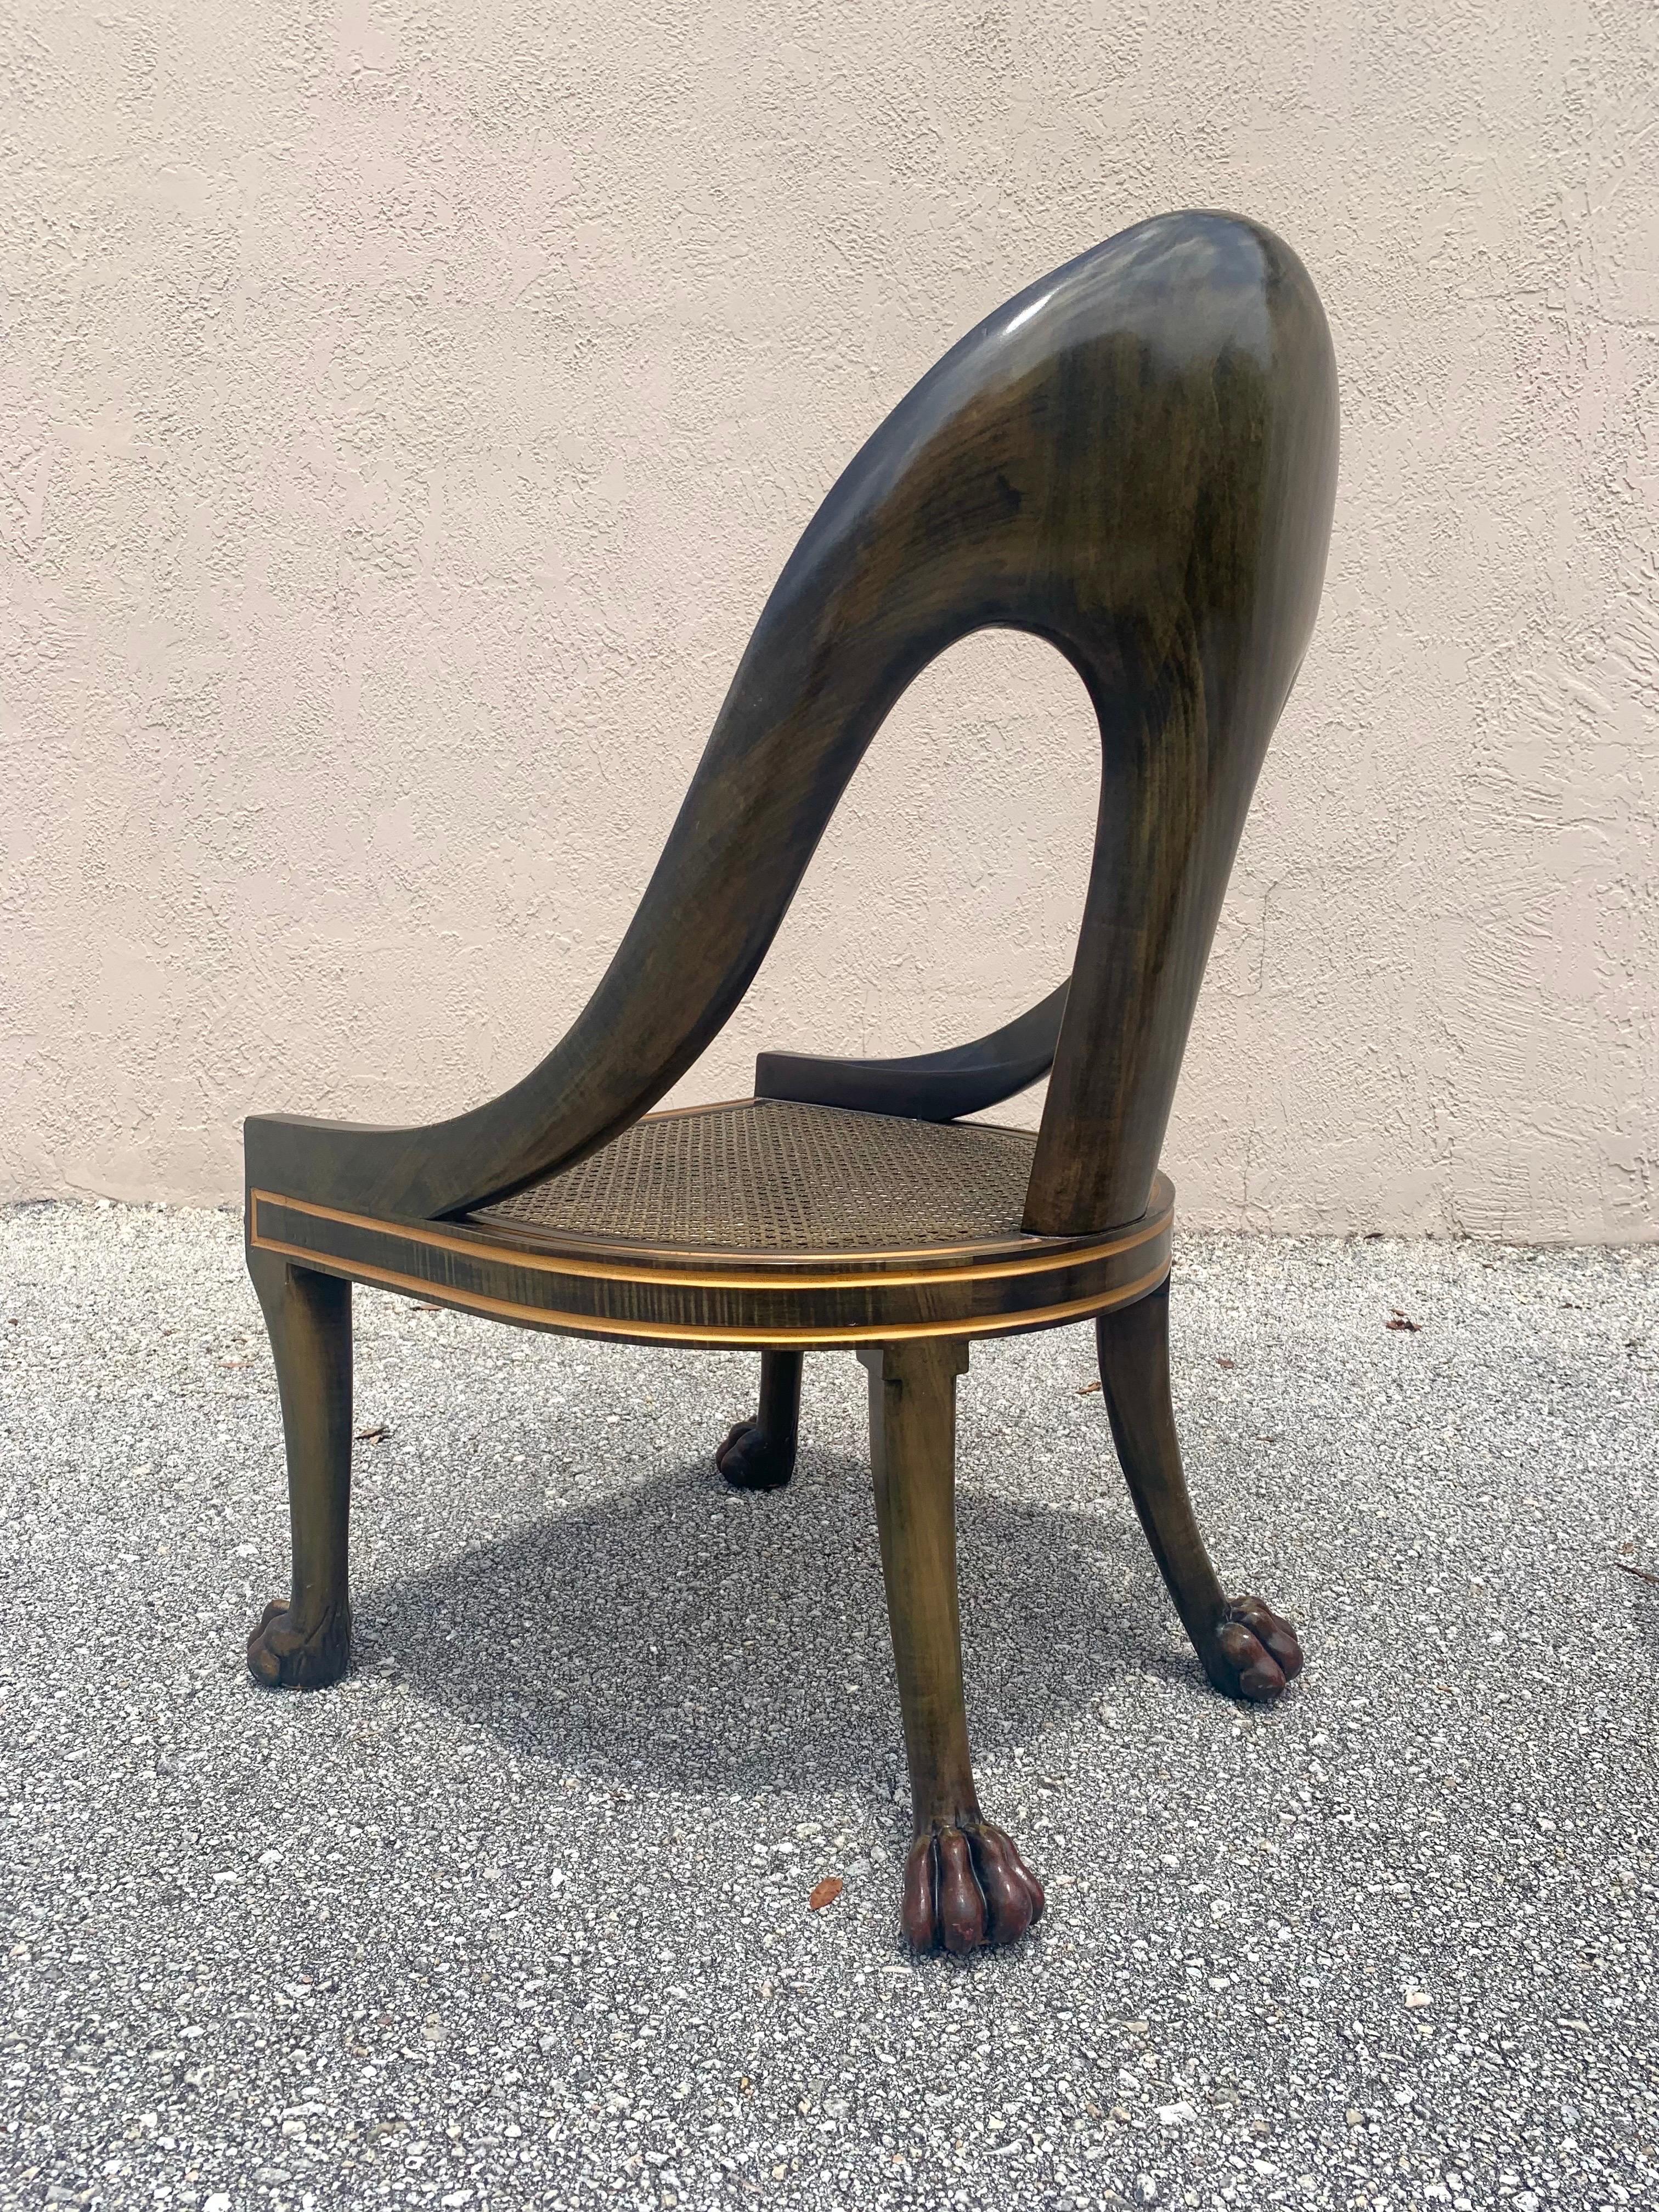 Hollywood Regency Gilt and Clawfoot Spoonback Chairs by Baker 5